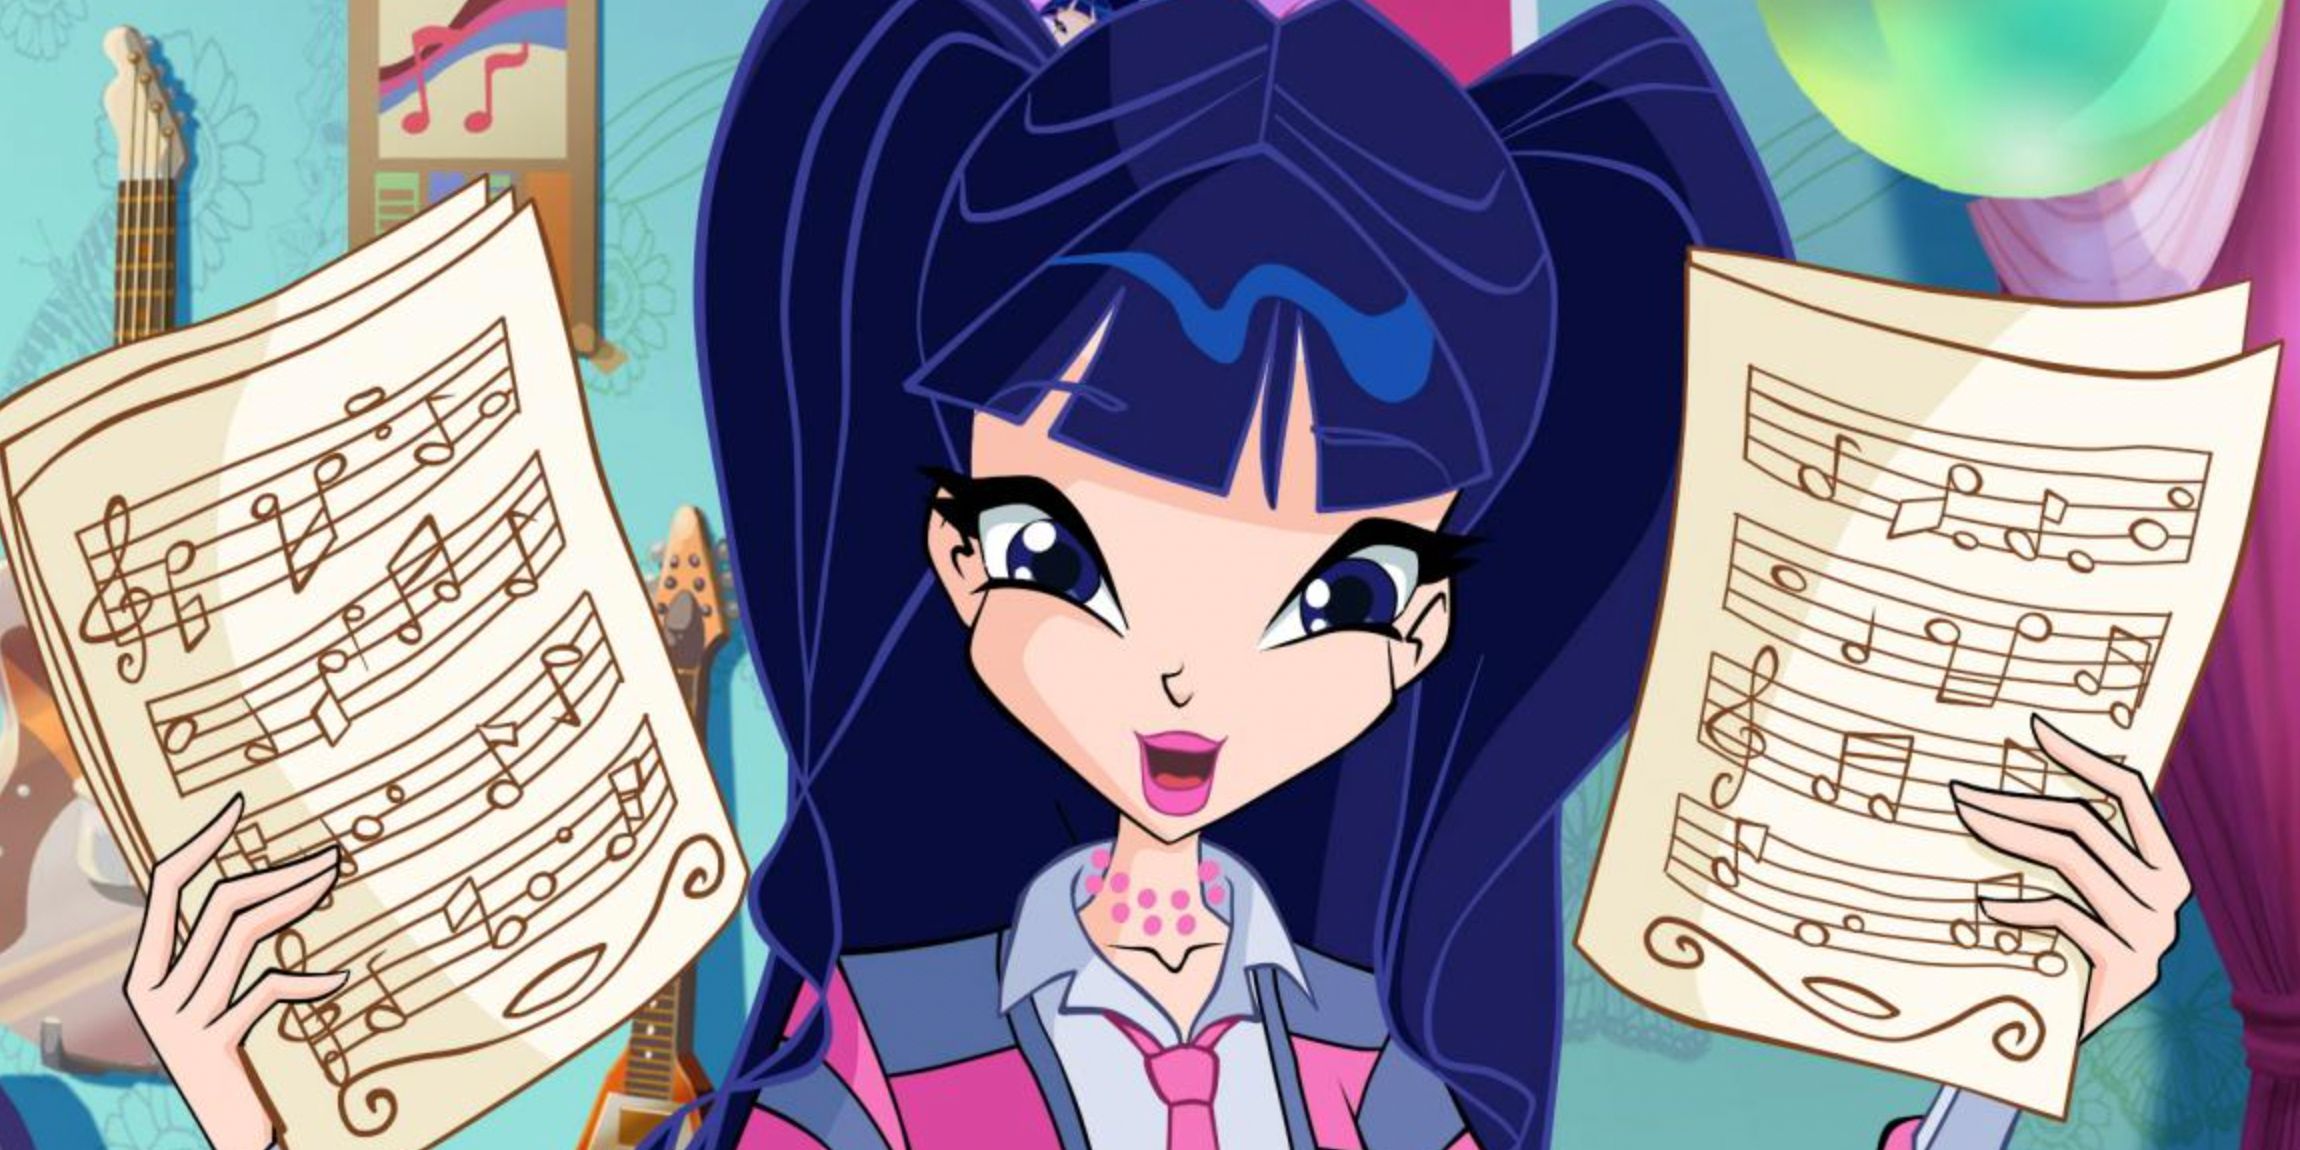 Yes, Those Fate: The Winx Saga Characters Were Recast In Season 2